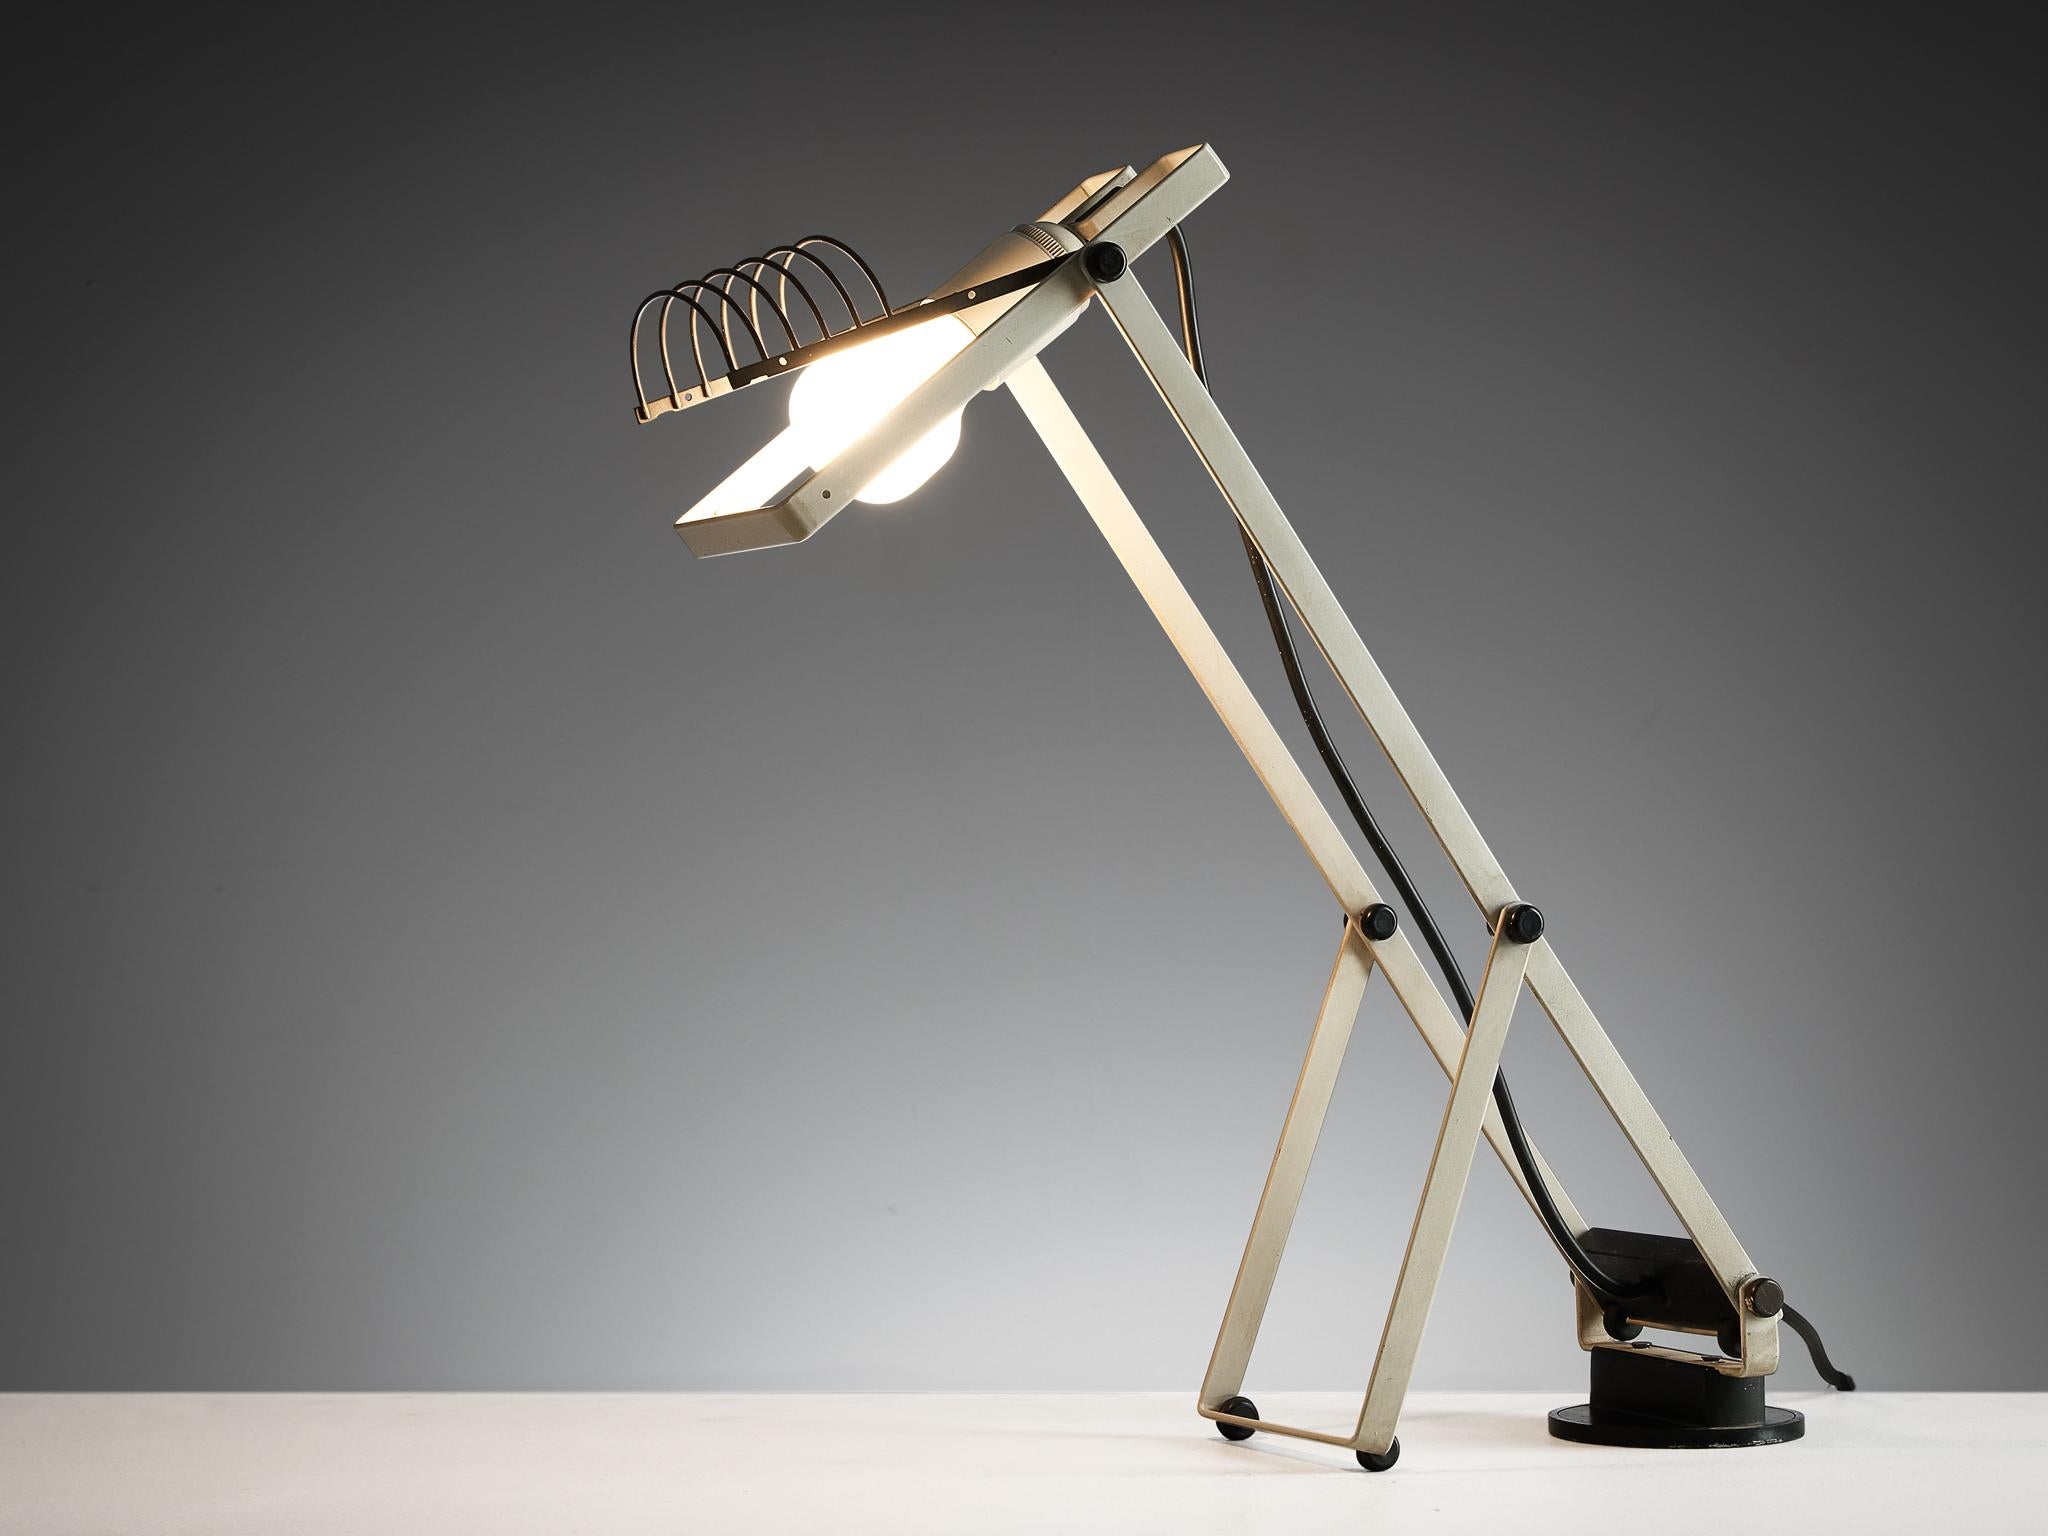 Ernesto Gismondi for Artemide, table Lamp model 'Sintesi Tavolo', lacquered steel, chrome-plated metal, Italy, 1976 

The founder of Artemide, Ernesto Gismondi (1931-2020), designed this lamp in the seventies. A highly functional lamp of which the